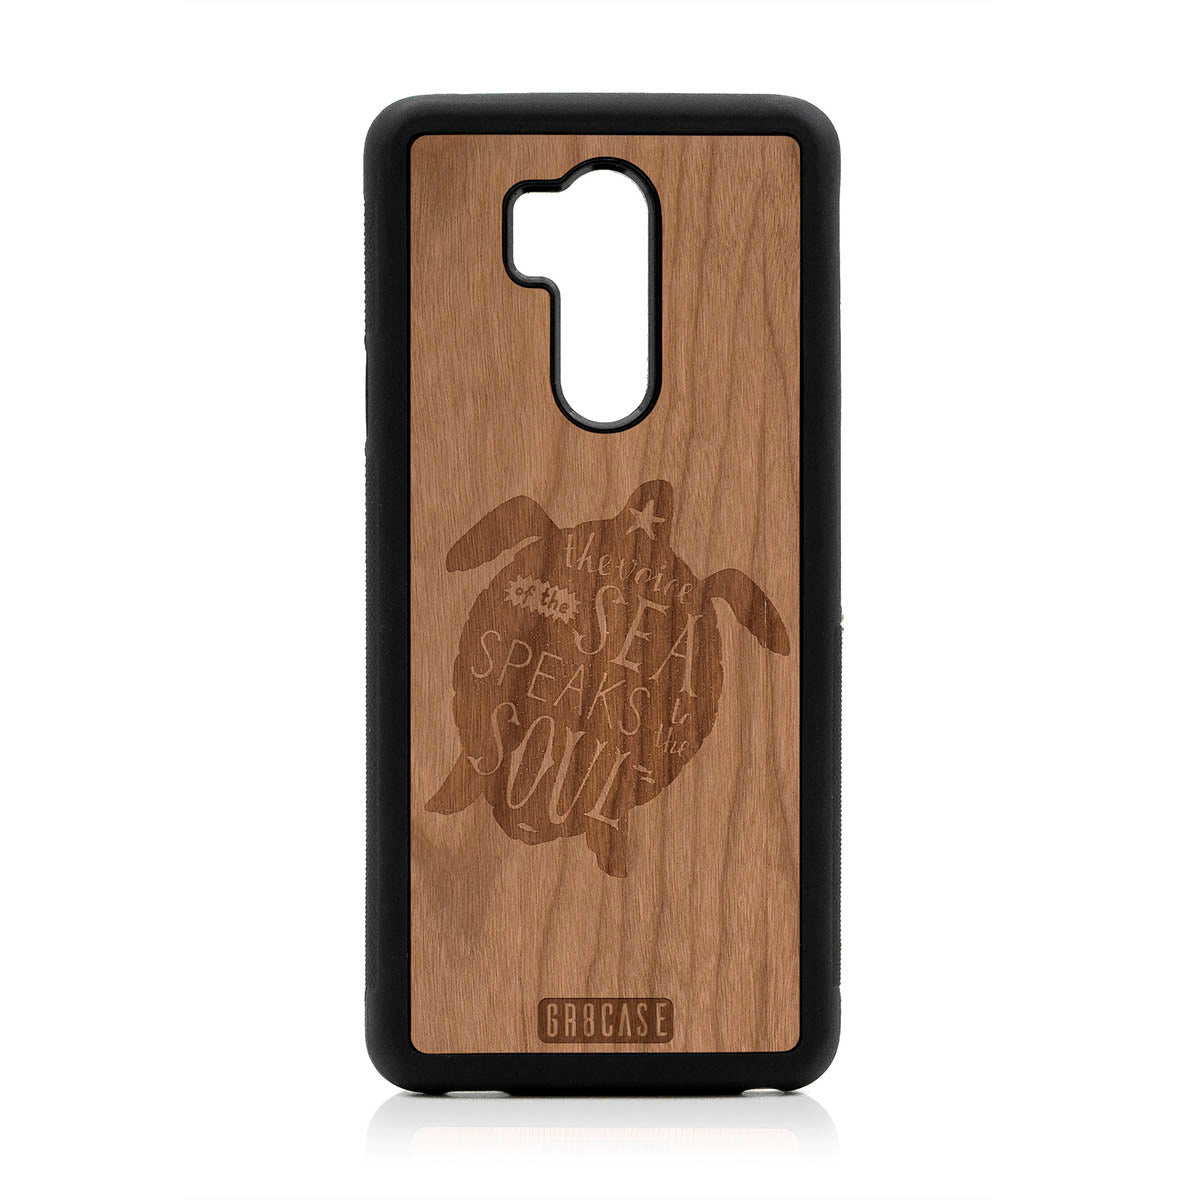 The Voice Of The Sea Speaks To The Soul (Turtle) Design Wood Case For LG G7 ThinQ